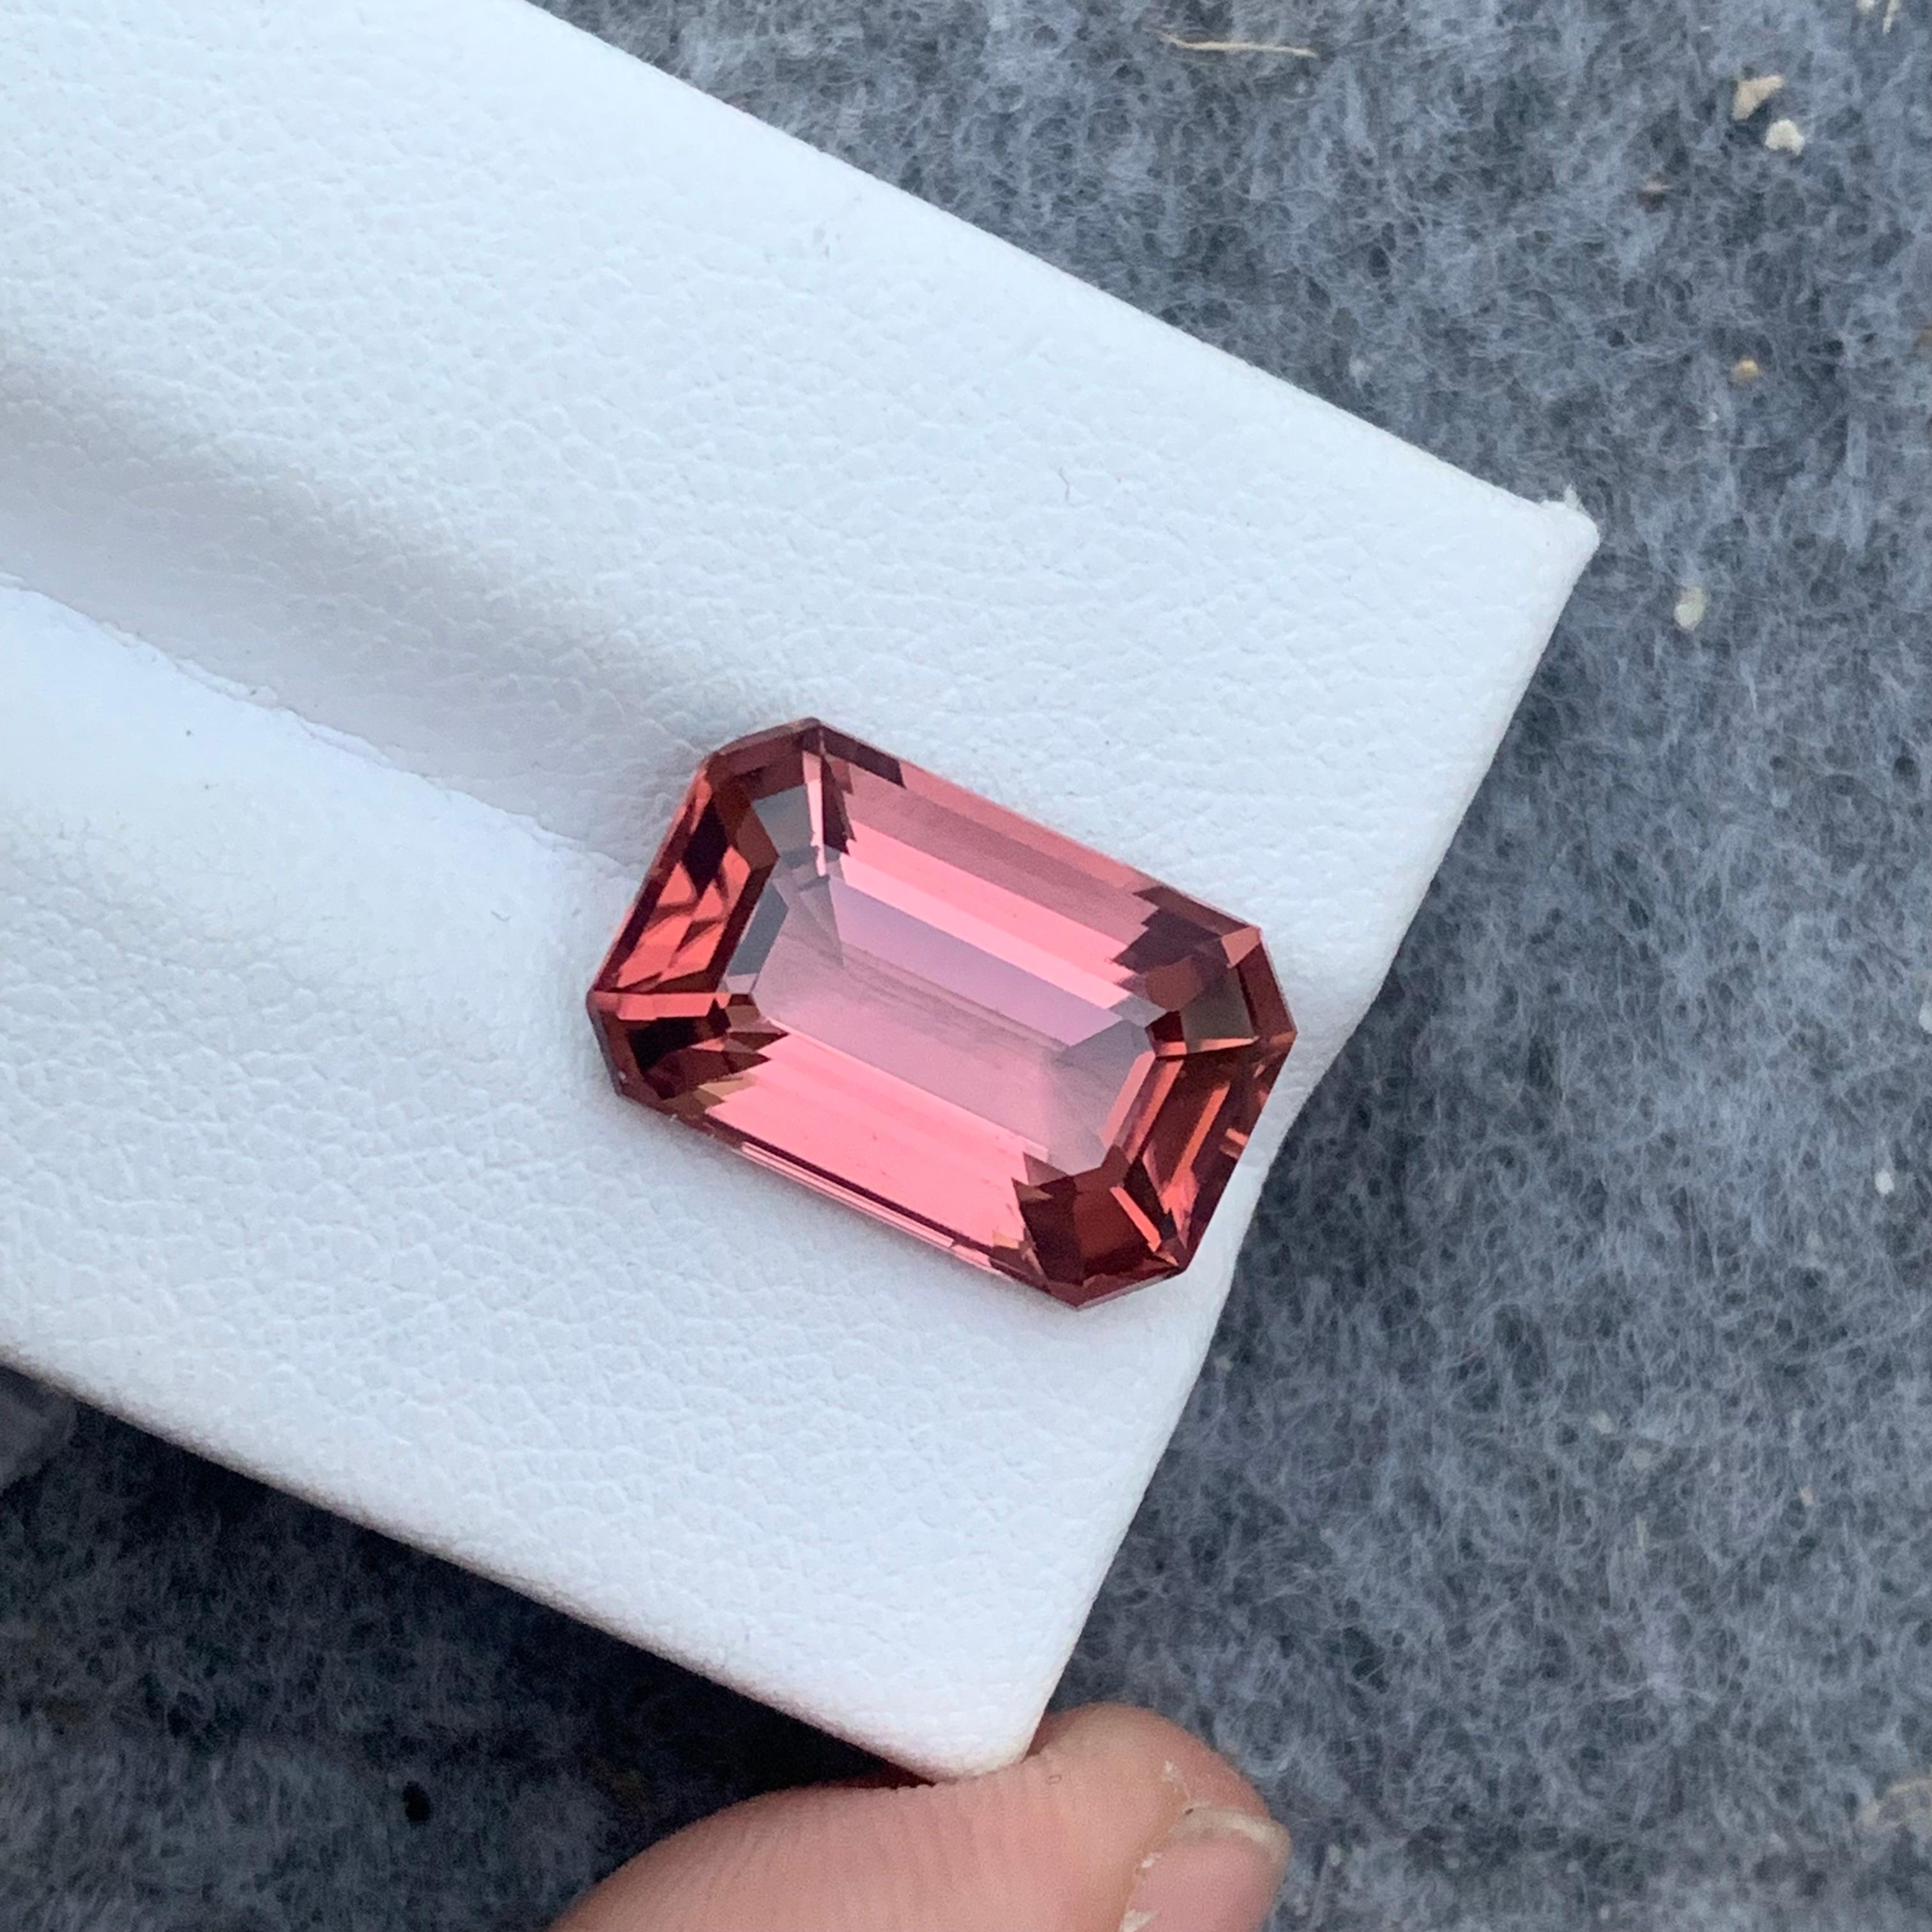 9.0 Carat AAA Quality Loose Soft Pink Tourmaline Emerald Cut From Afghanistan 11